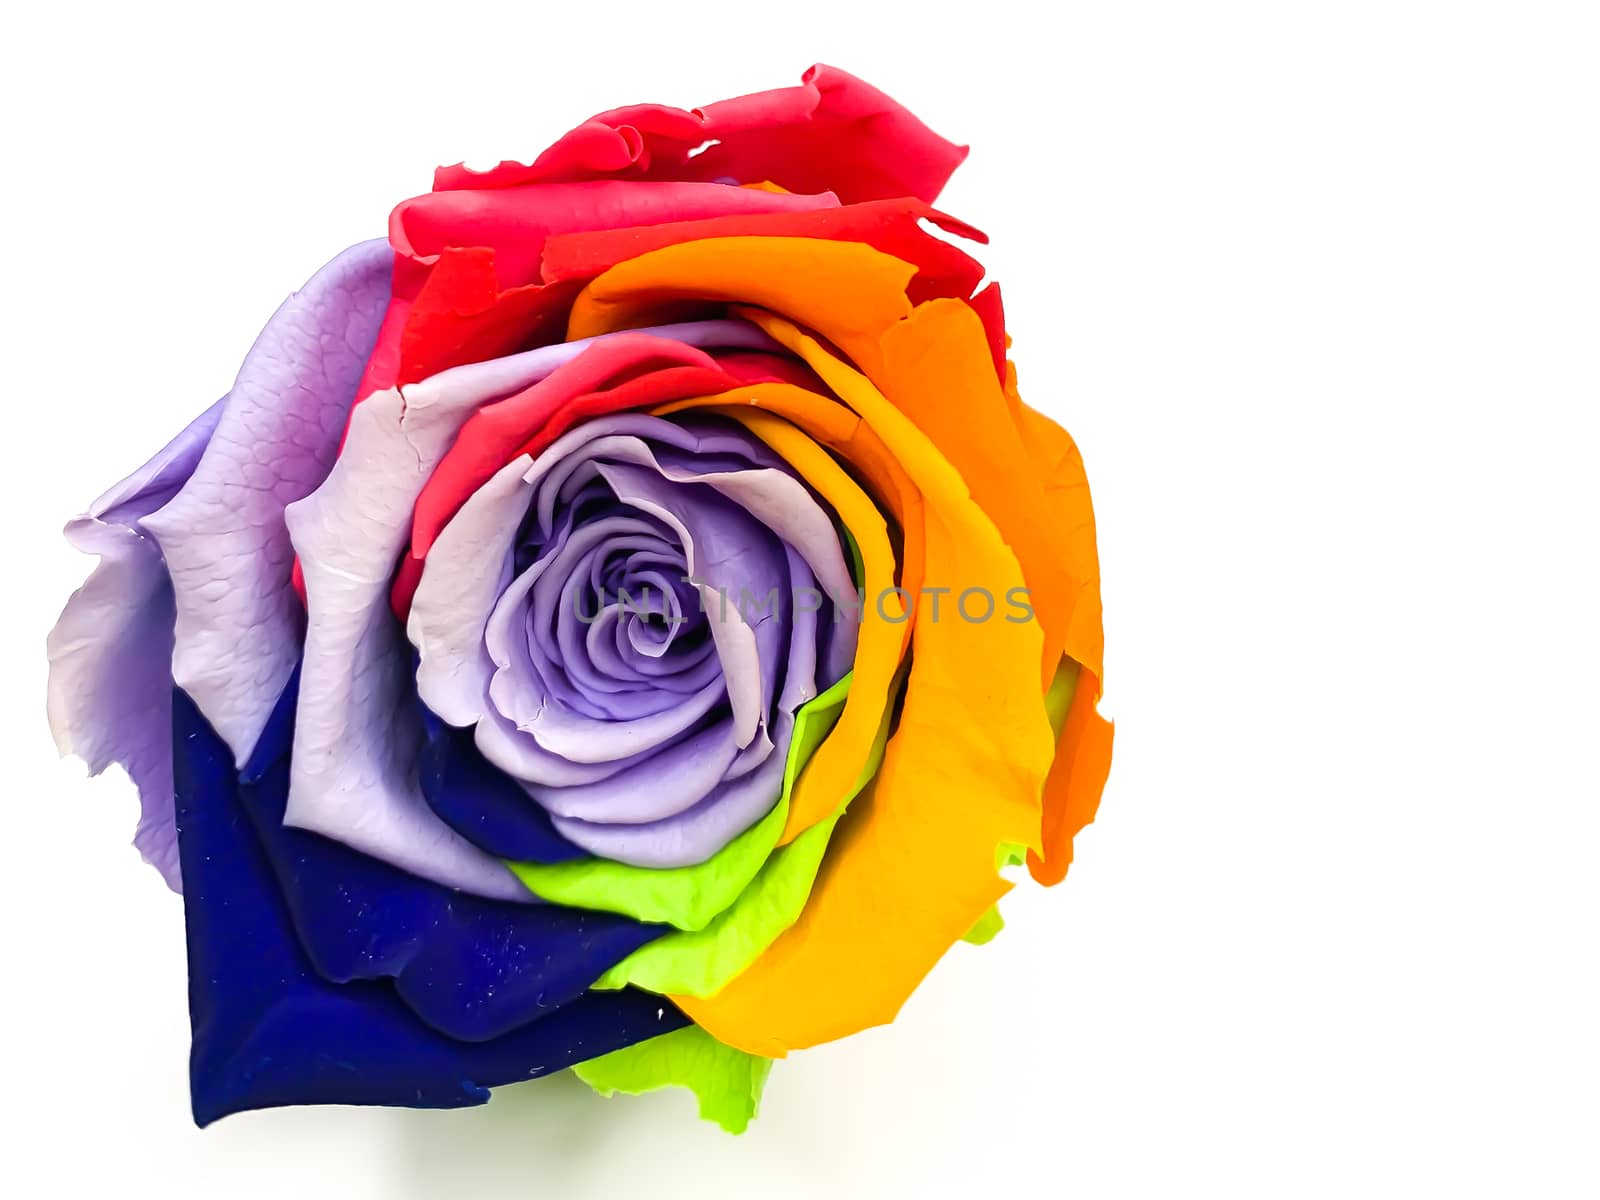 Macro of rainbow rose flower and multi color petals on a white background with empty space for text. Horizontal image